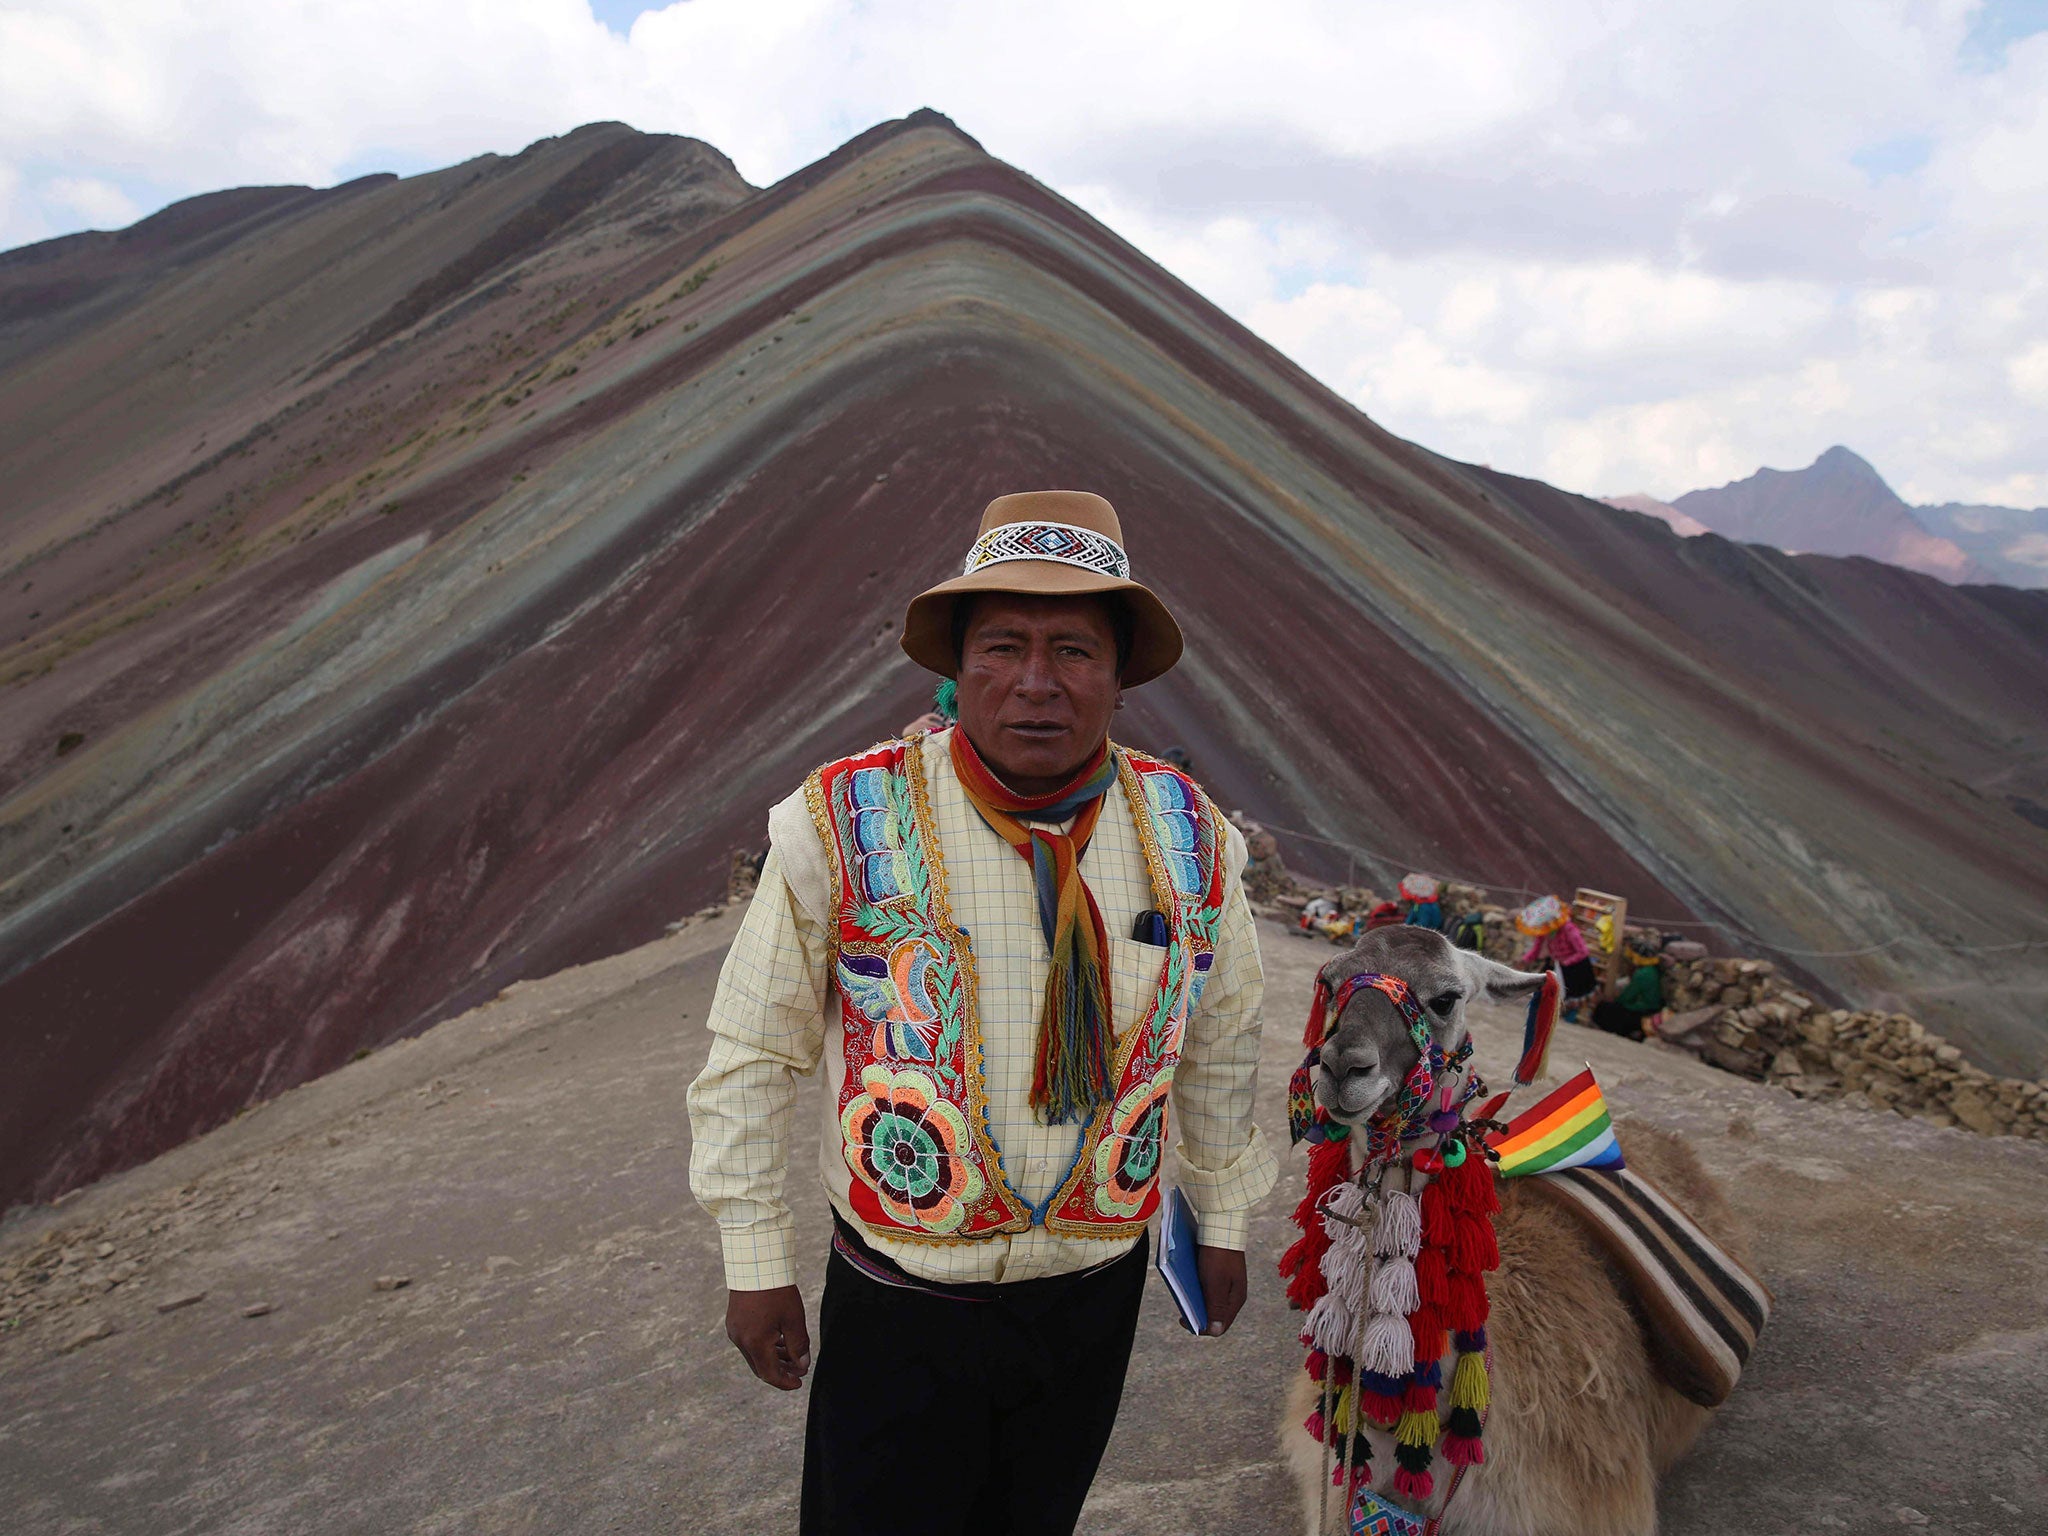 Rainbow Mountain has become a popular destination for backpackers exploring Peru